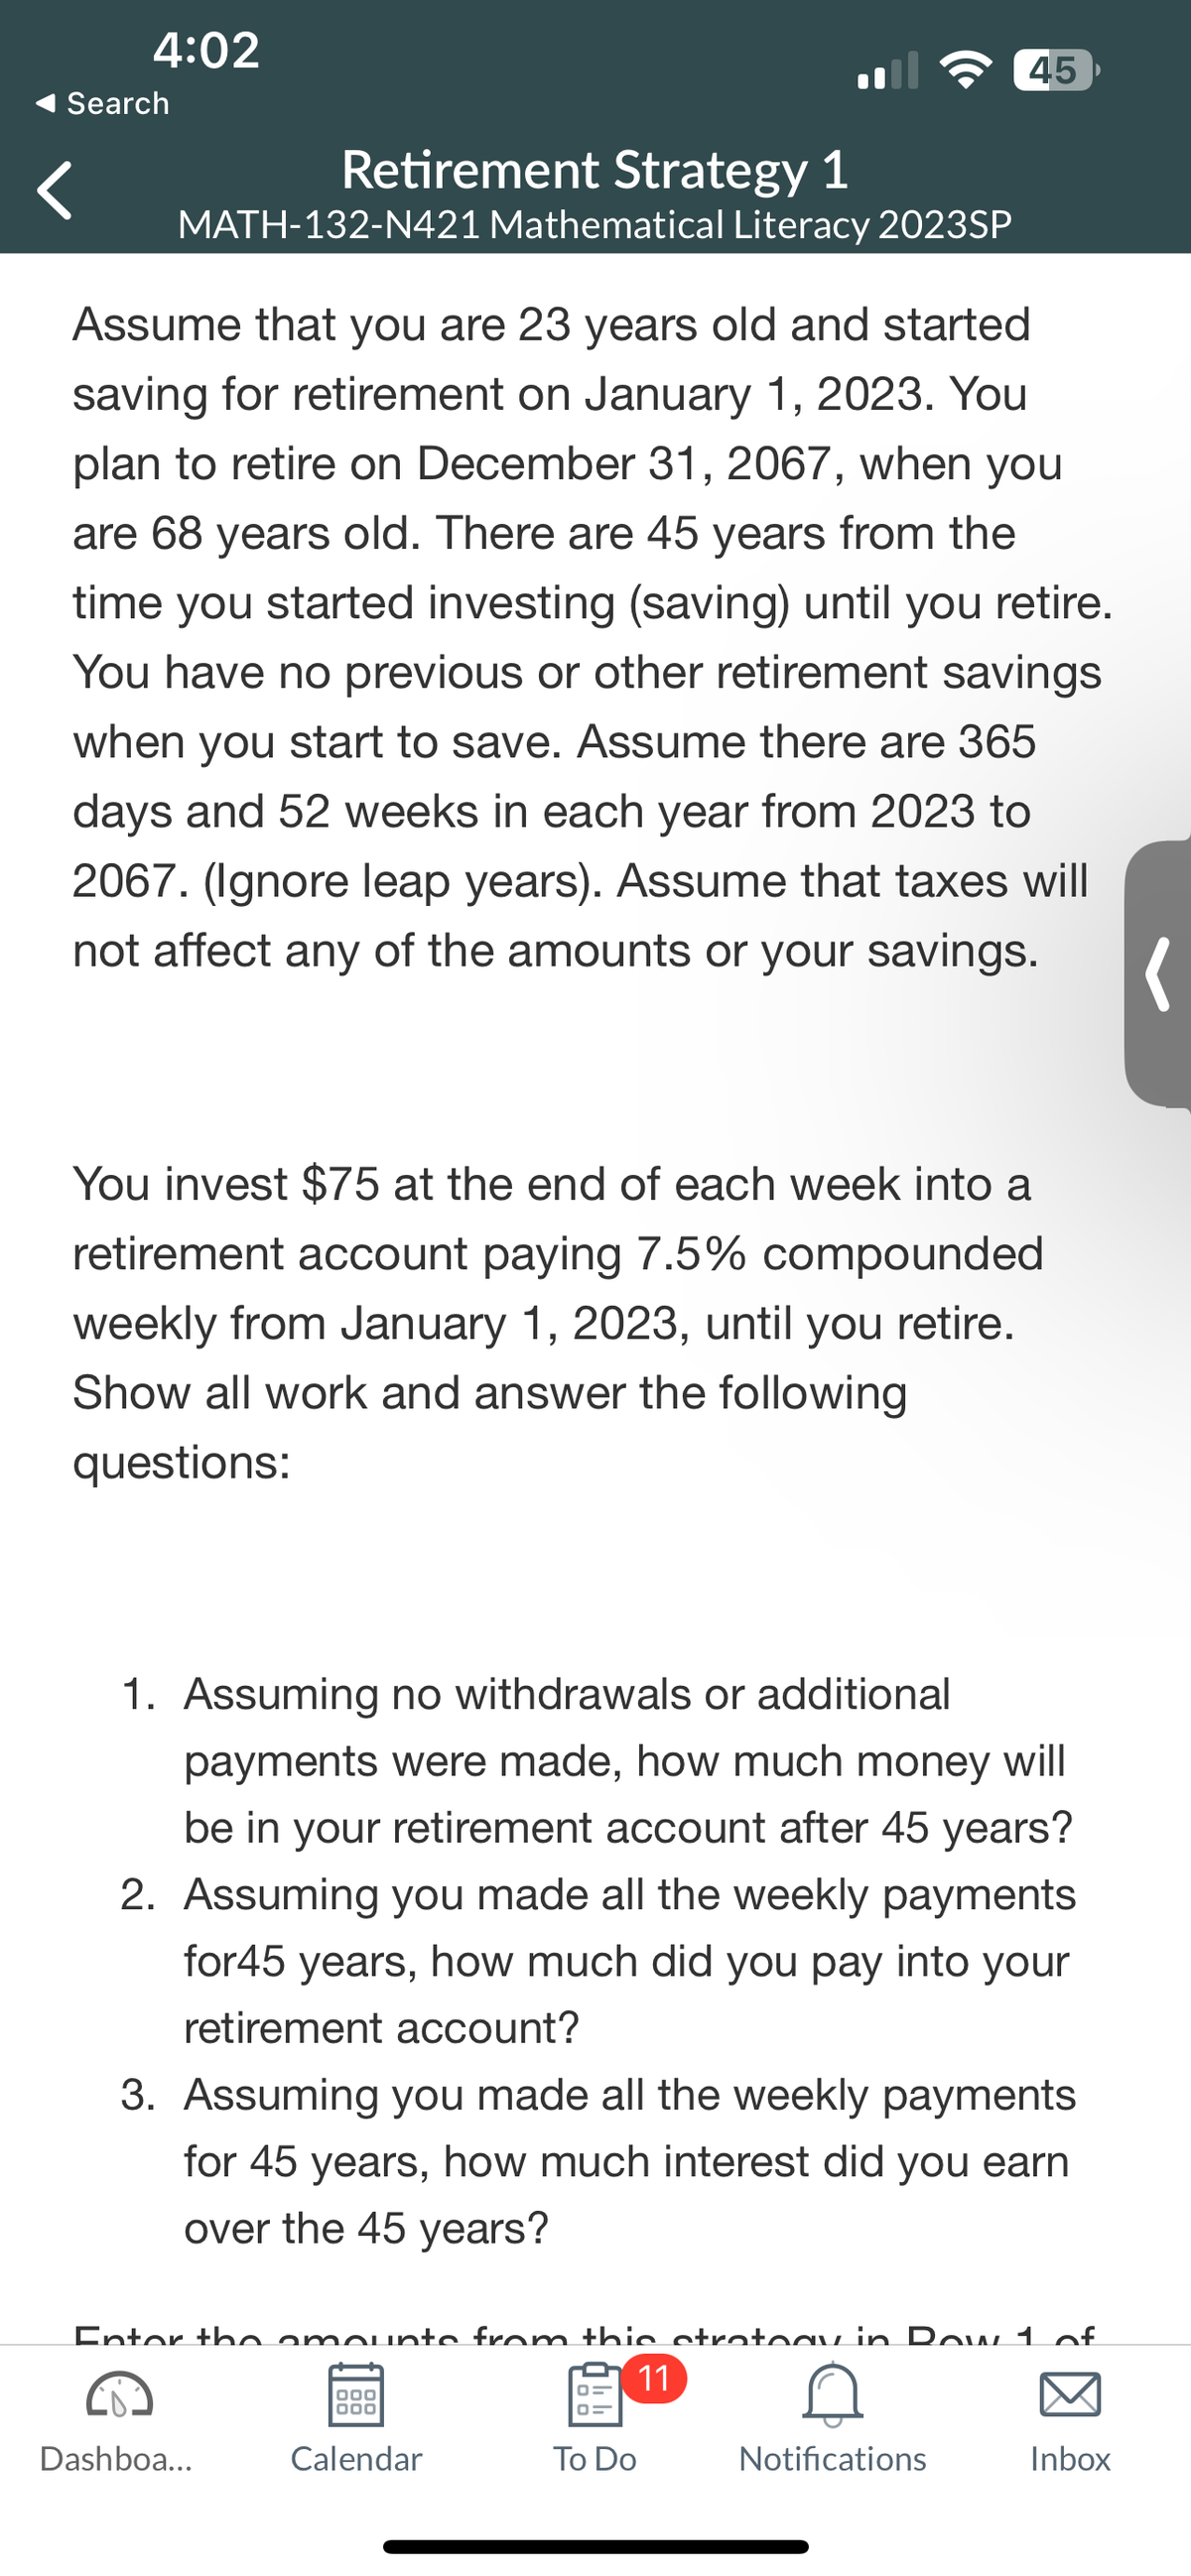 4:02
Search
Retirement Strategy 1
MATH-132-N421 Mathematical Literacy 2023SP
Assume that you are 23 years old and started
saving for retirement on January 1, 2023. You
plan to retire on December 31, 2067, when you
are 68 years old. There are 45 years from the
time you started investing (saving) until you retire.
You have no previous or other retirement savings
when you start to save. Assume there are 365
days and 52 weeks in each year from 2023 to
2067. (Ignore leap years). Assume that taxes will
not affect any of the amounts or your savings.
(
You invest $75 at the end of each week into a
retirement account paying 7.5% compounded
weekly from January 1, 2023, until you retire.
Show all work and answer the following
questions:
1. Assuming no withdrawals or additional
payments were made, how much money will
be in your retirement account after 45 years?
2. Assuming you made all the weekly payments
for45 years, how much did you pay into your
retirement account?
45
3. Assuming you made all the weekly payments
for 45 years, how much interest did you earn
over the 45 years?
Enter the amounts from this strategy in Row 1 of
11
0
Notifications
Dashboa...
000
Calendar
To Do
Inbox